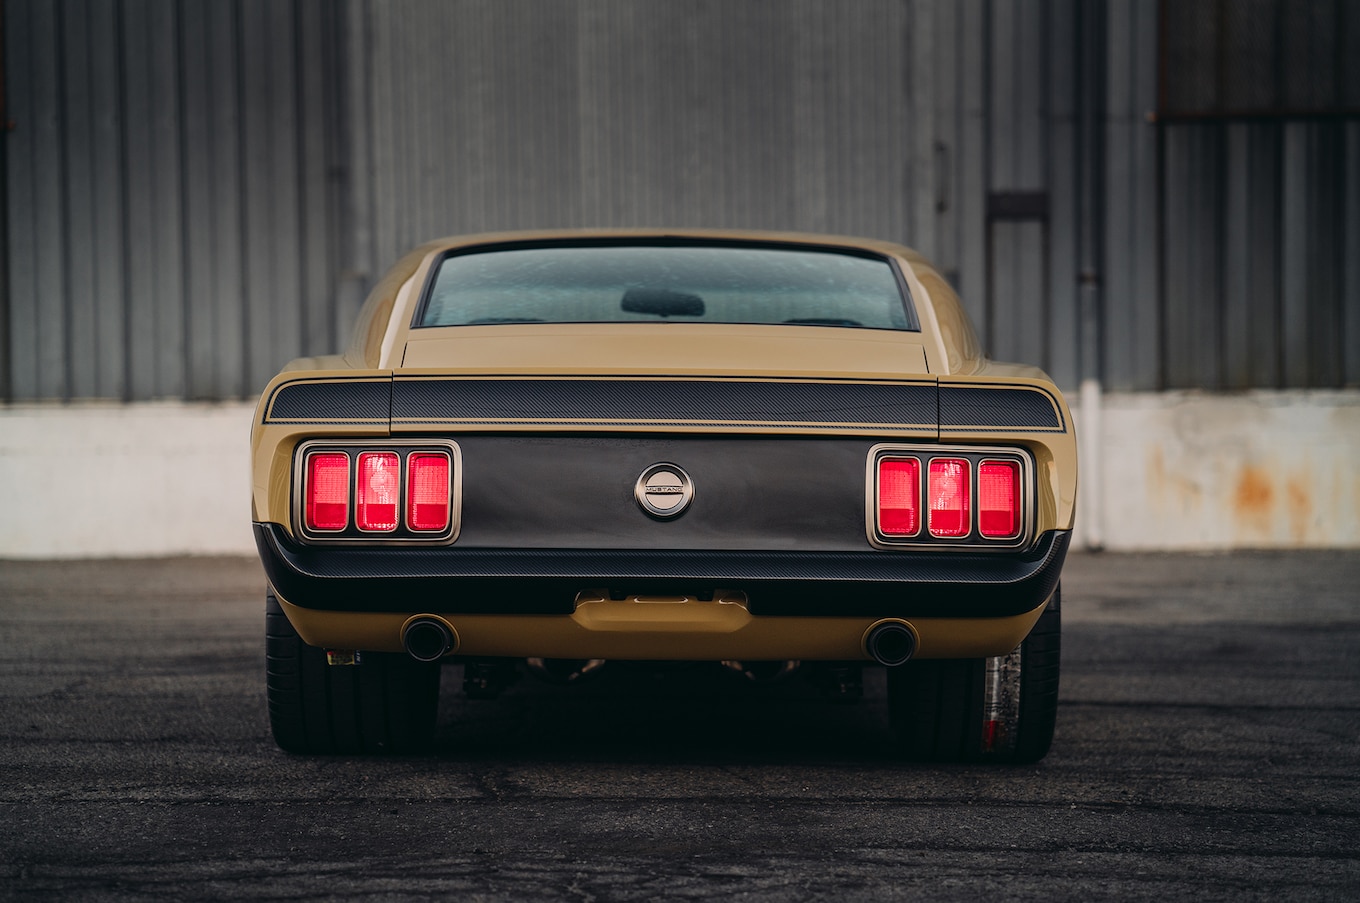 1970-Ford-Mustang-Boss-302-by-SpeedKore-and-Robert-Downey-Jr-rear-taillights-on.jpg